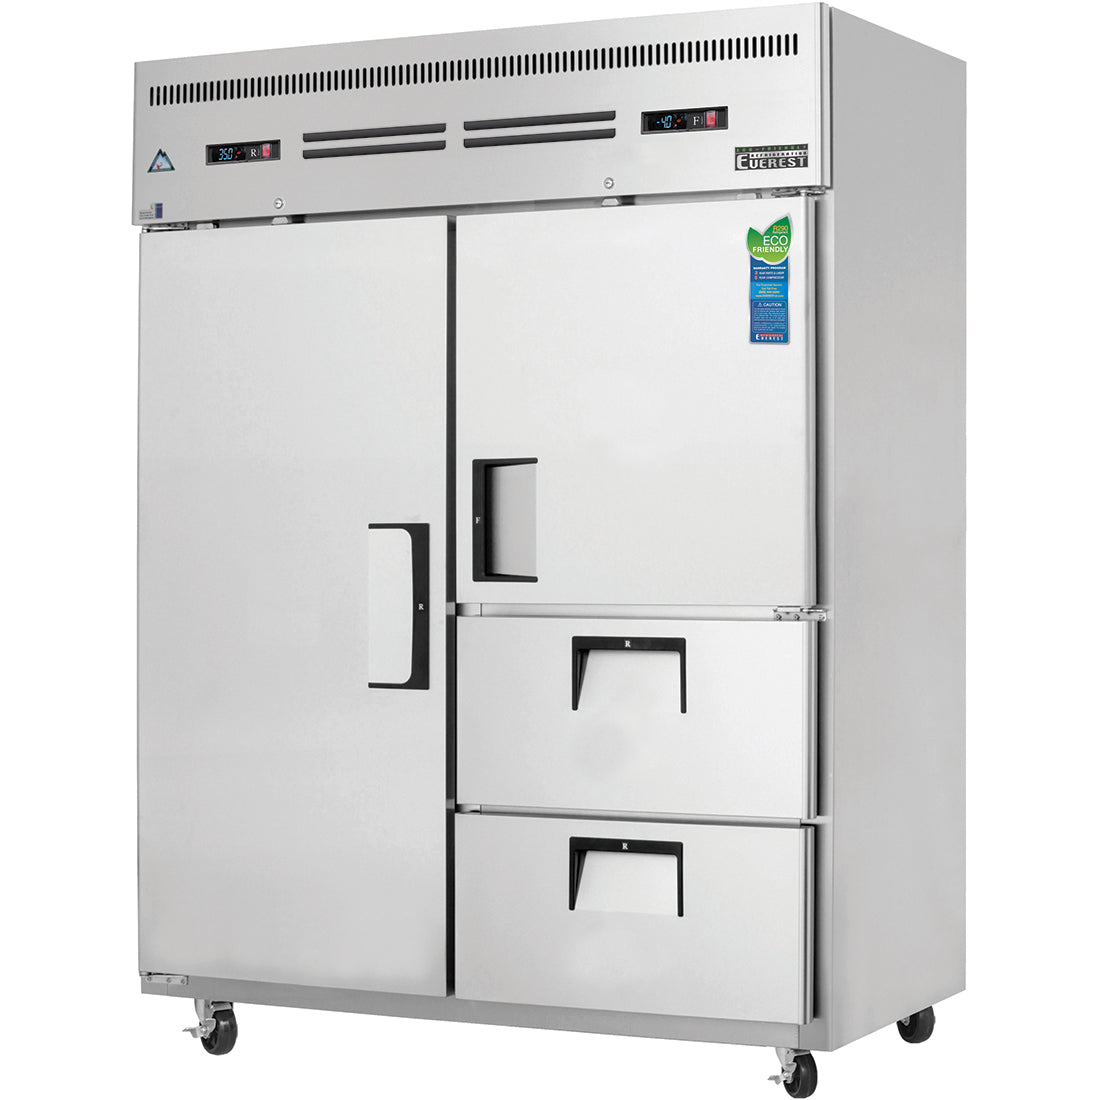 Everest ES Series-ESWQ2D2 Two Section Full/Half Door and Drawer Combo Upright Reach-In Dual Temperature Refrigerator/Freezer Combo